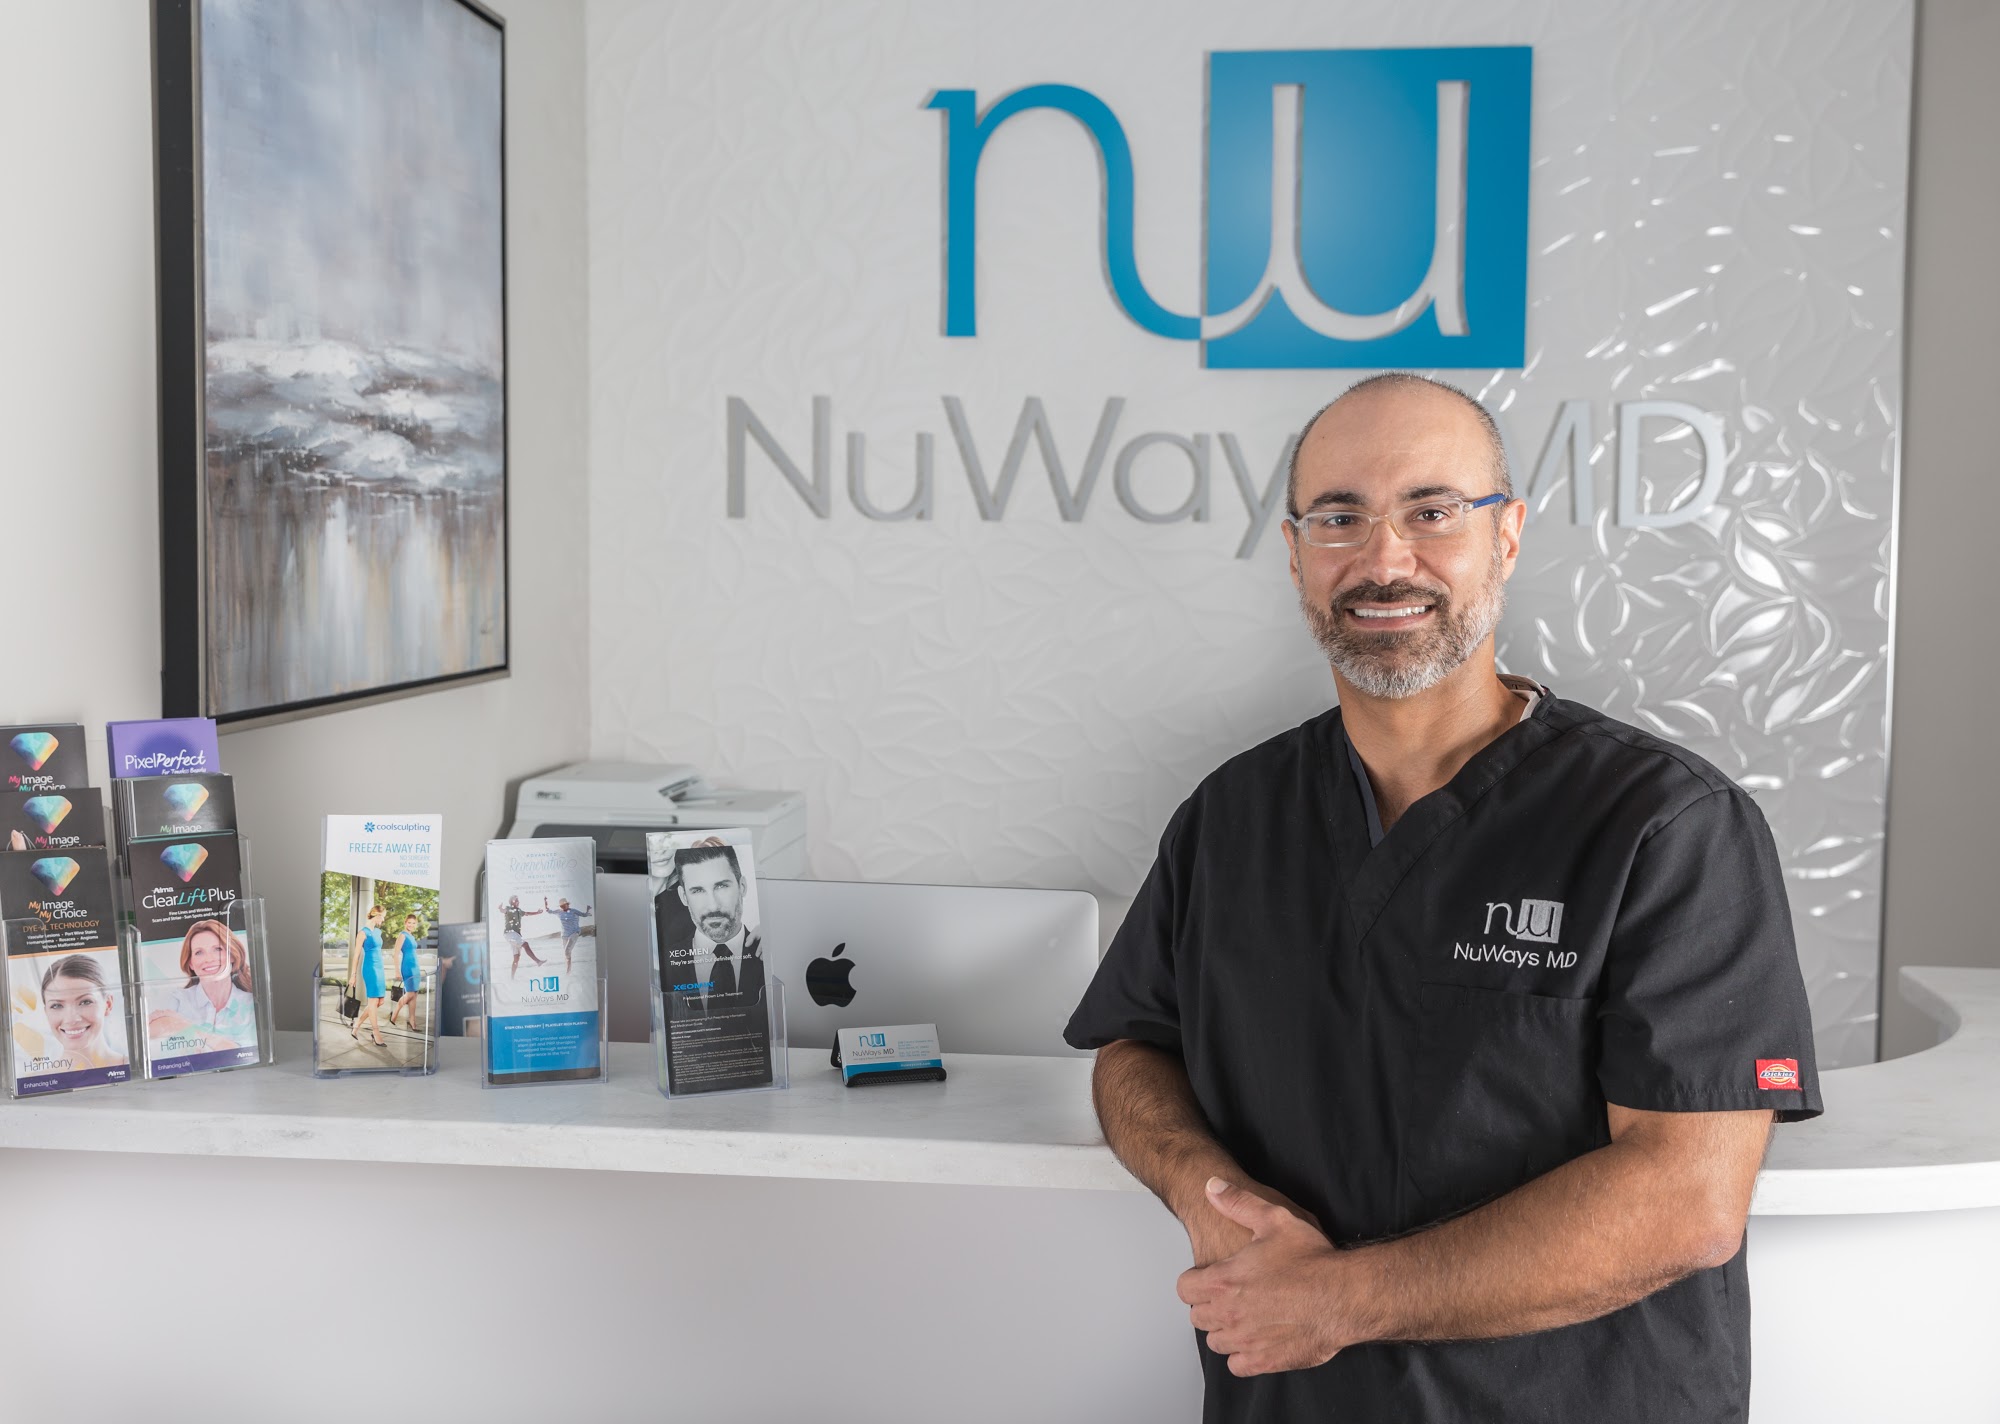 NuWays MD Anti-Aging & Wellness - Medical Spa | Botox & Filler | PRP | Morpheus8 | IV Therapy